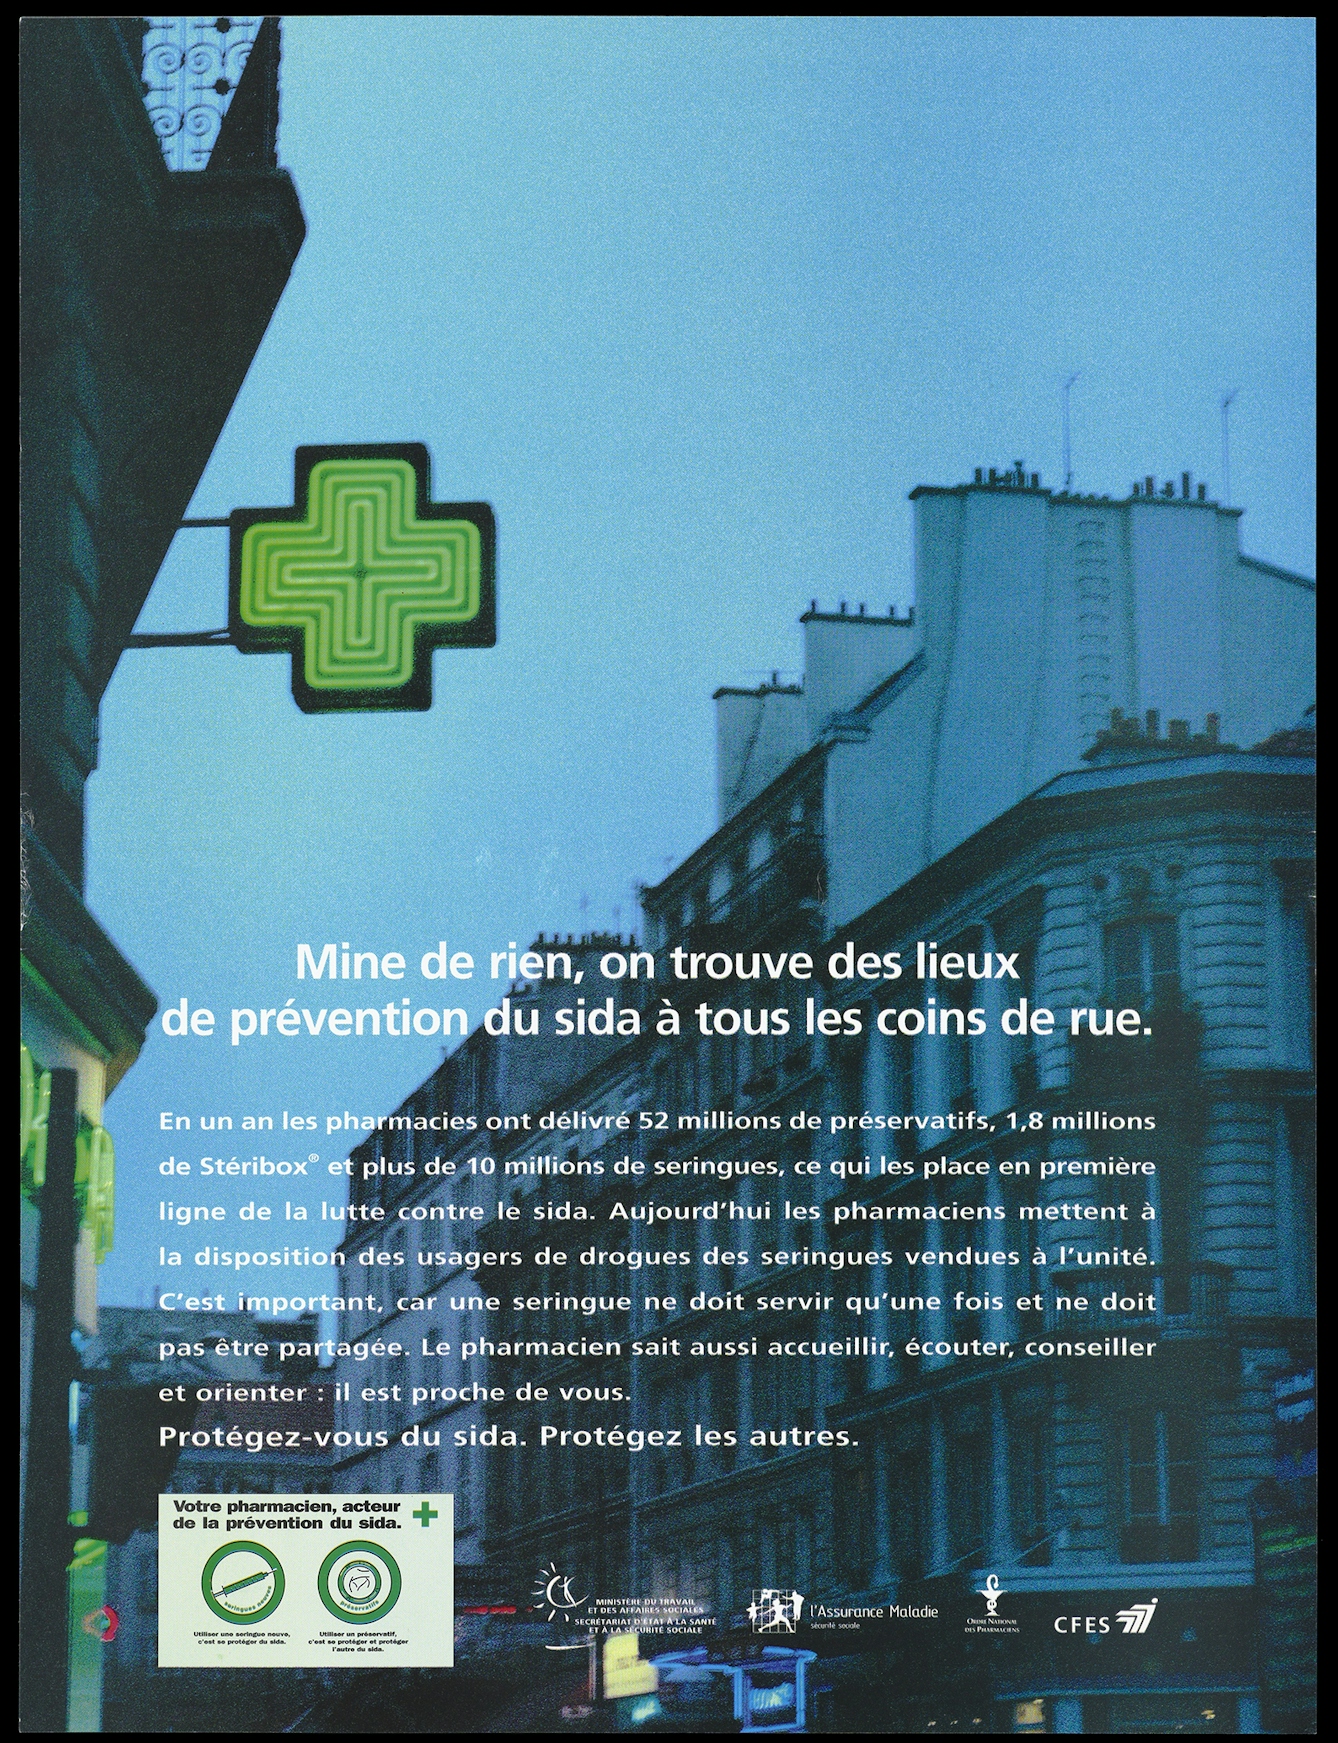 French pharmacy poster showing green cross pharmacy sign